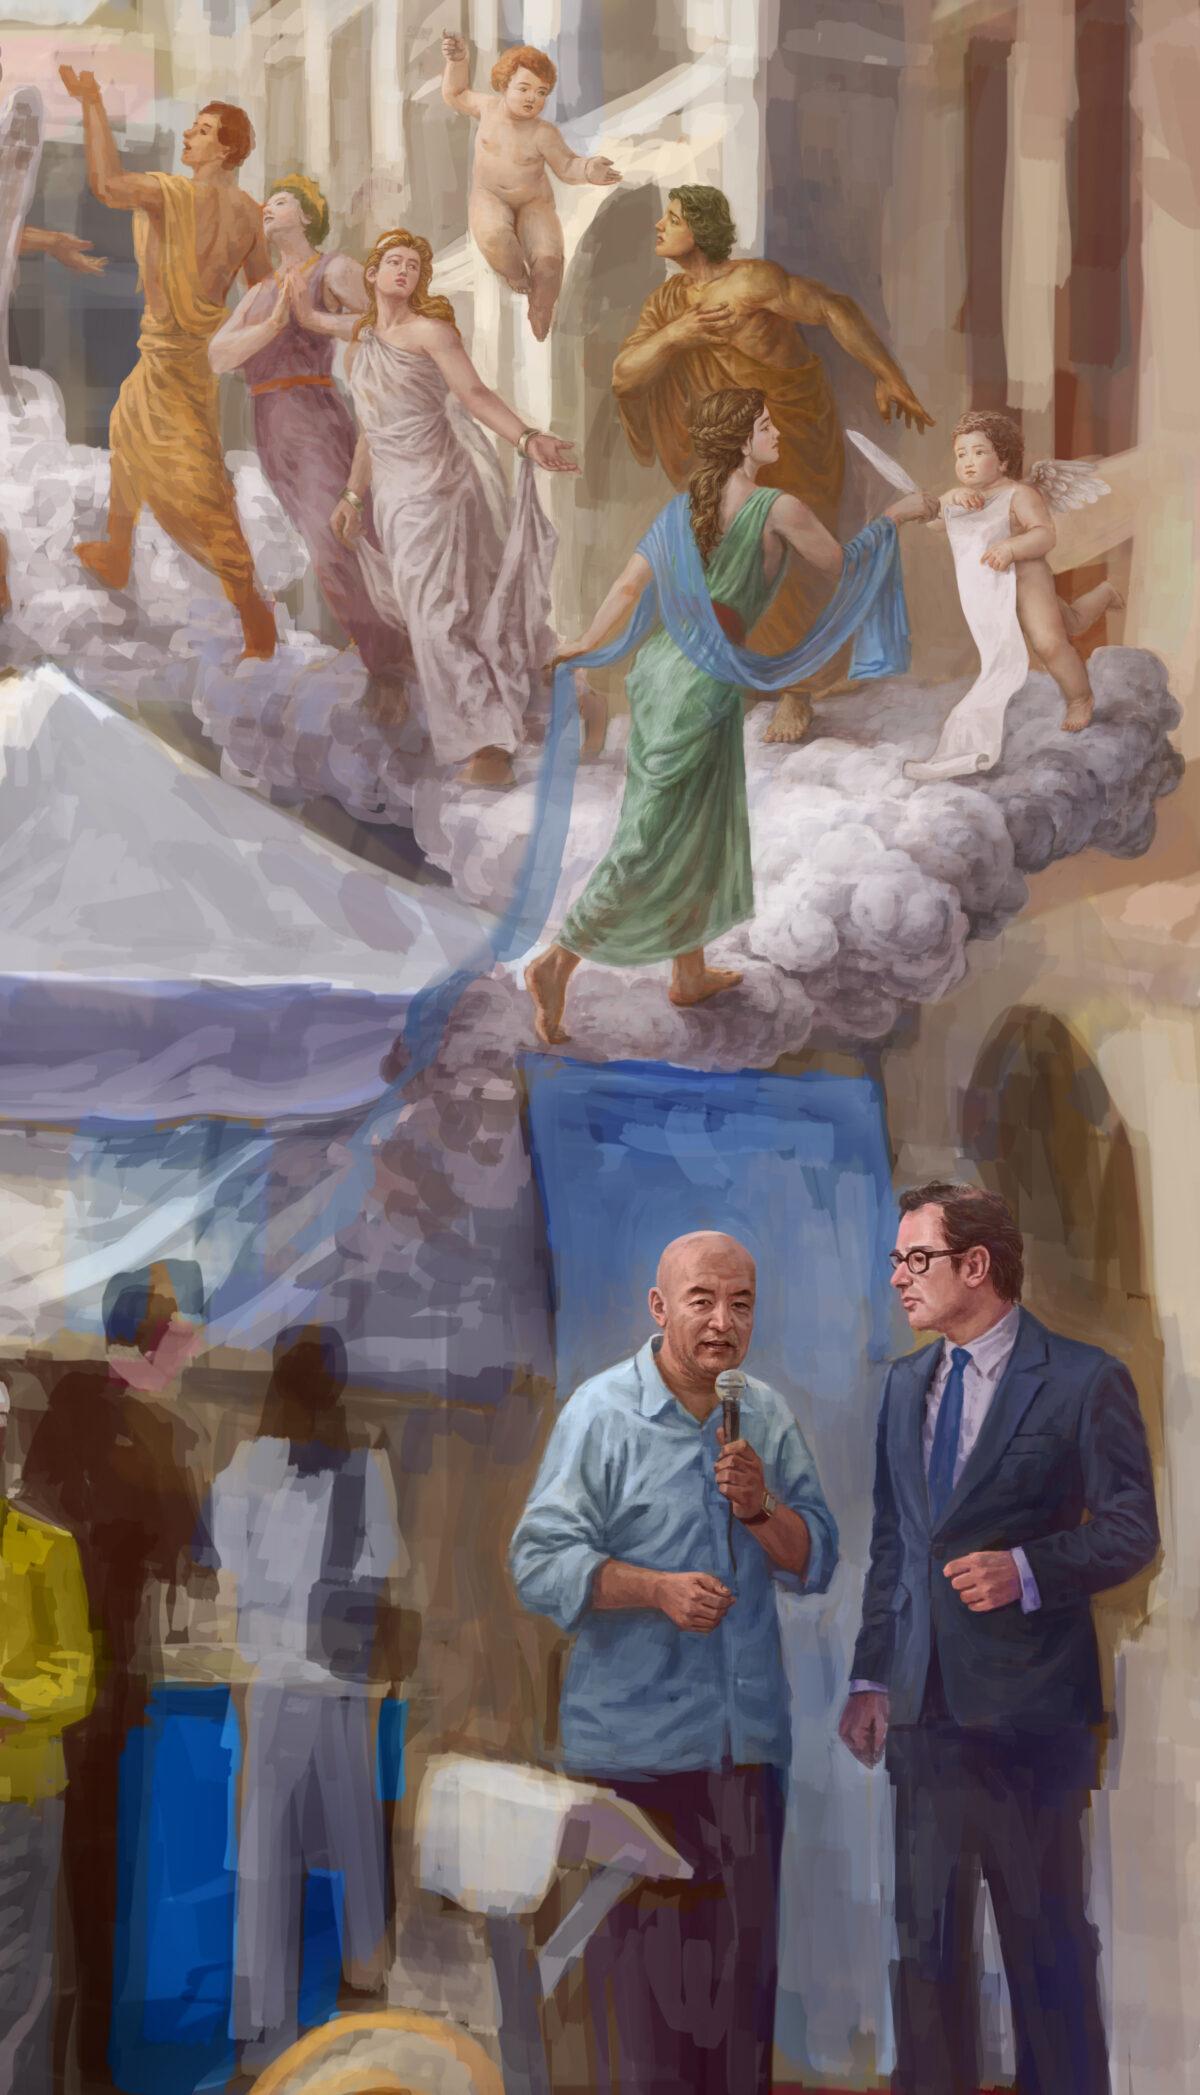 "The Way Home": A section of the painting Duong is currently working on. (Courtesy of Loc Minh Duong)